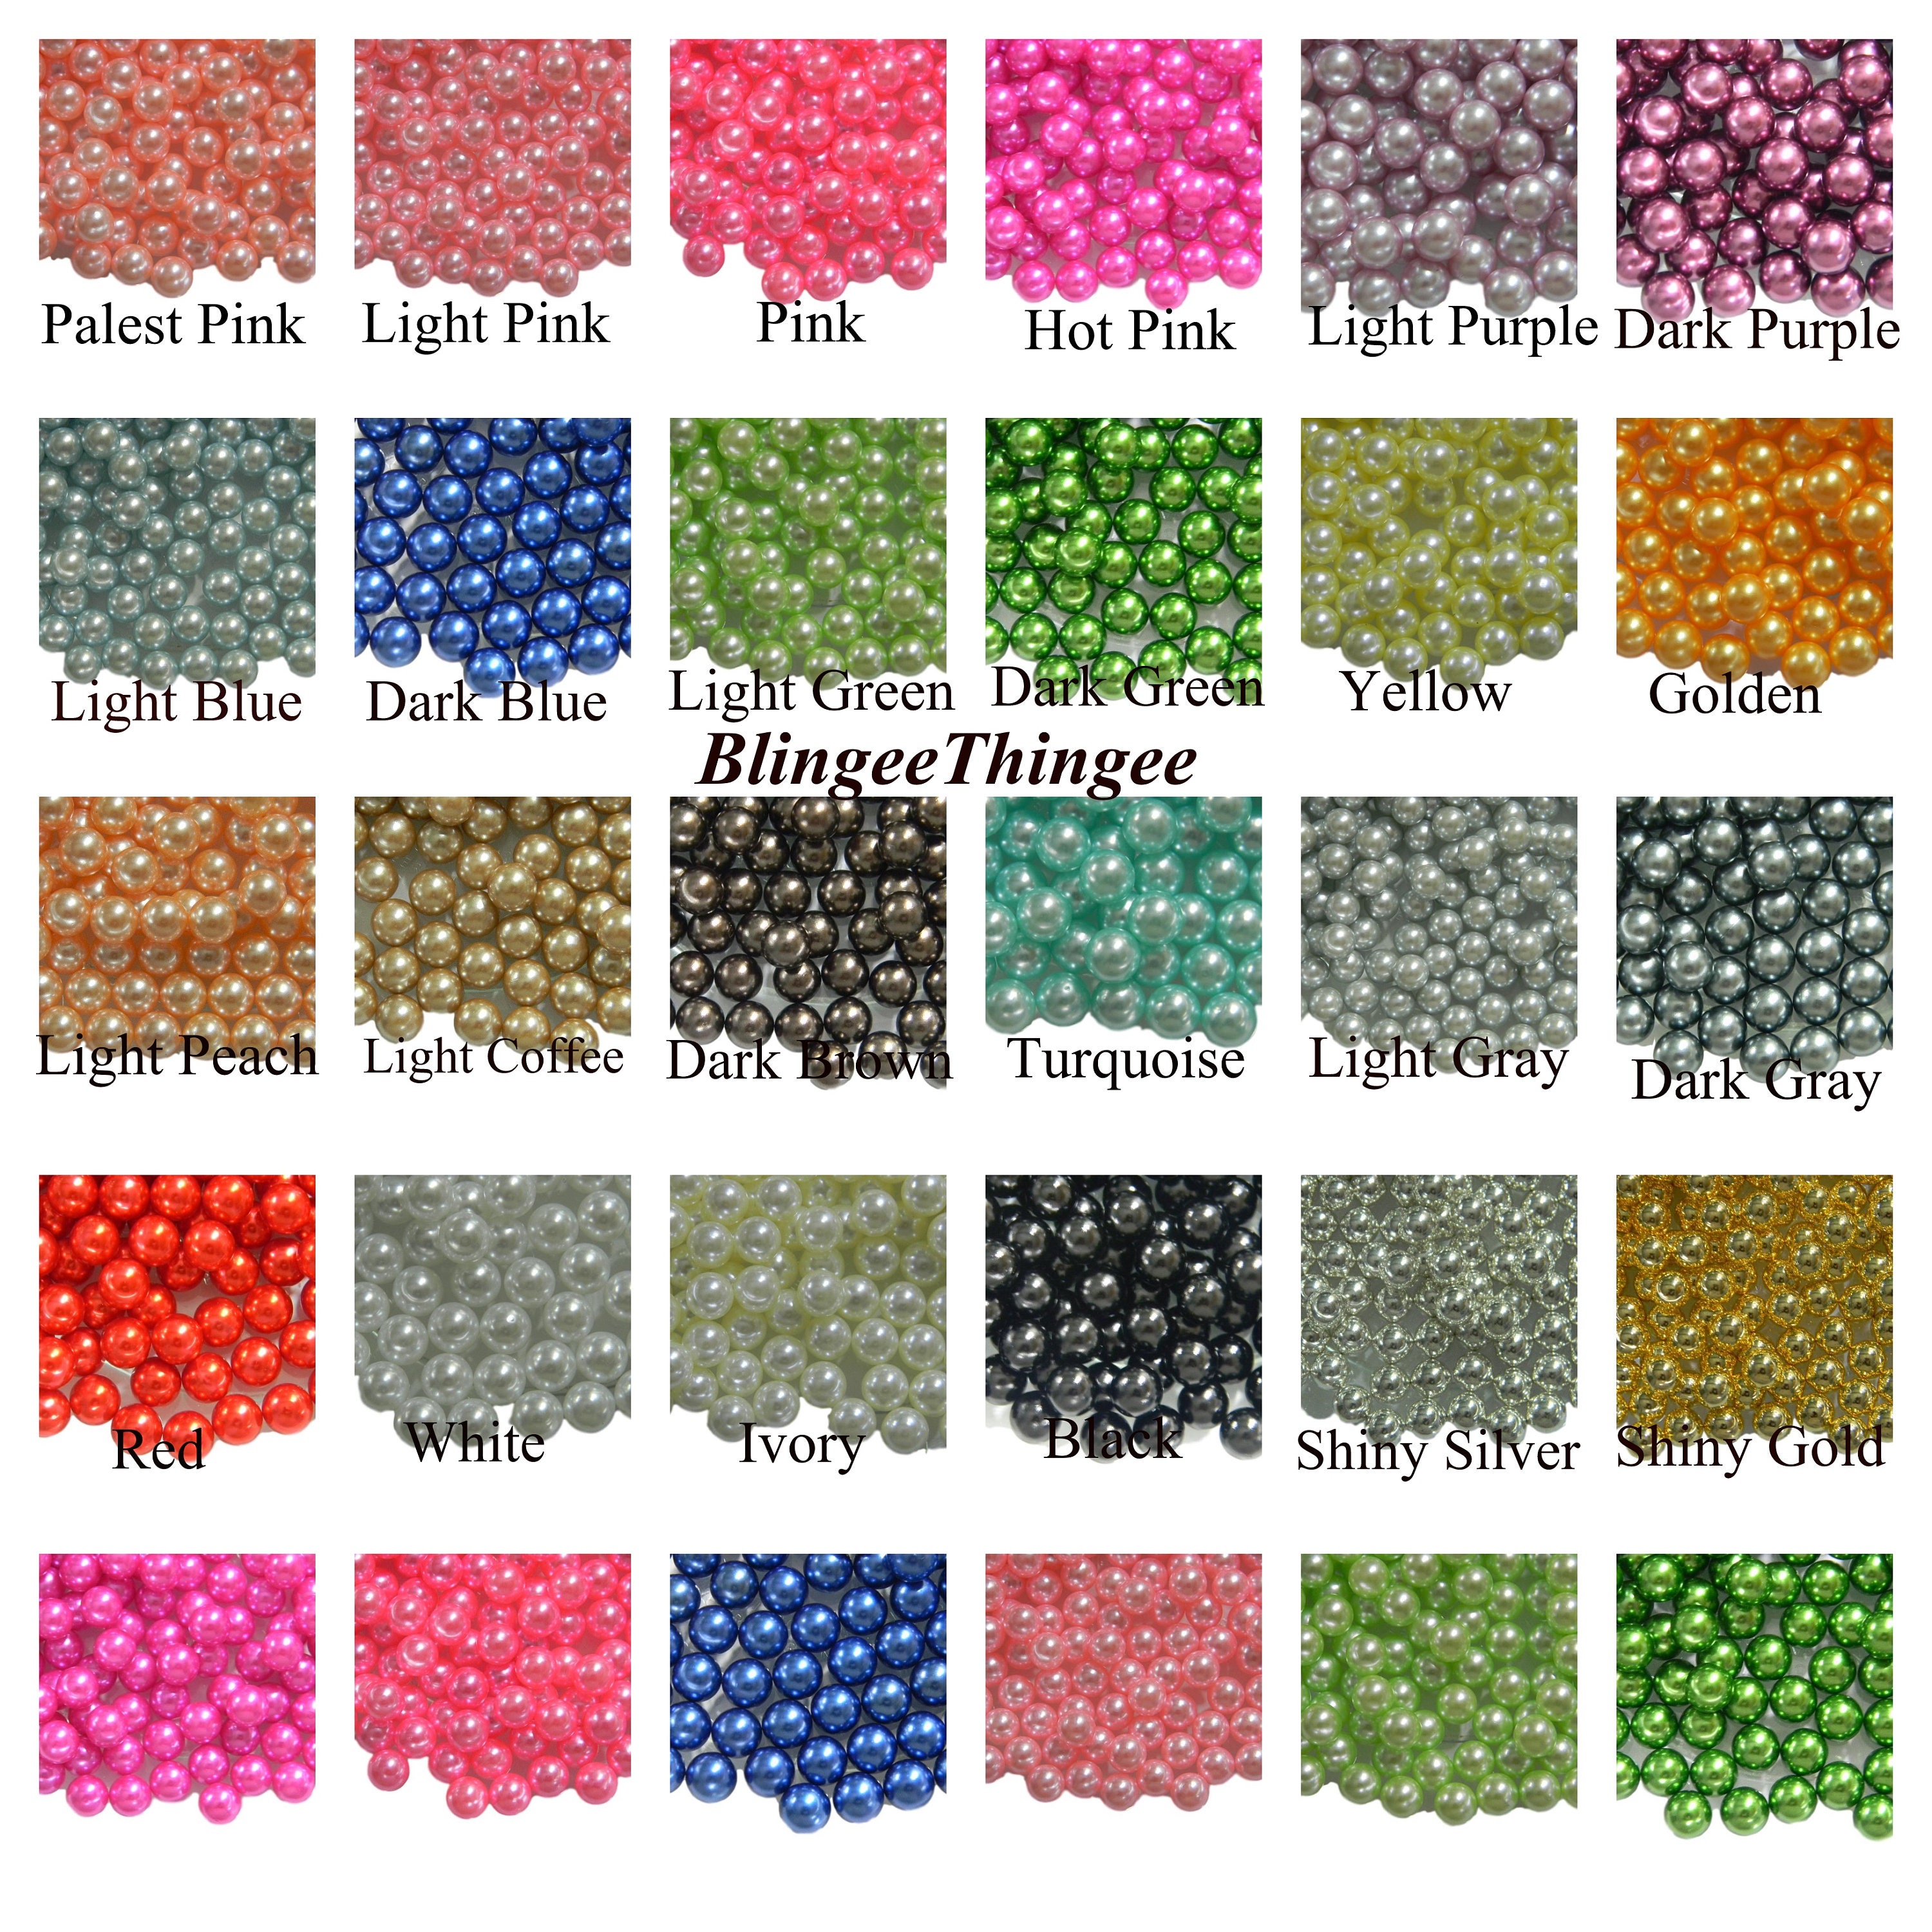 Mixed Color Imitation Glass Pearl Beads for Making Craft DIY